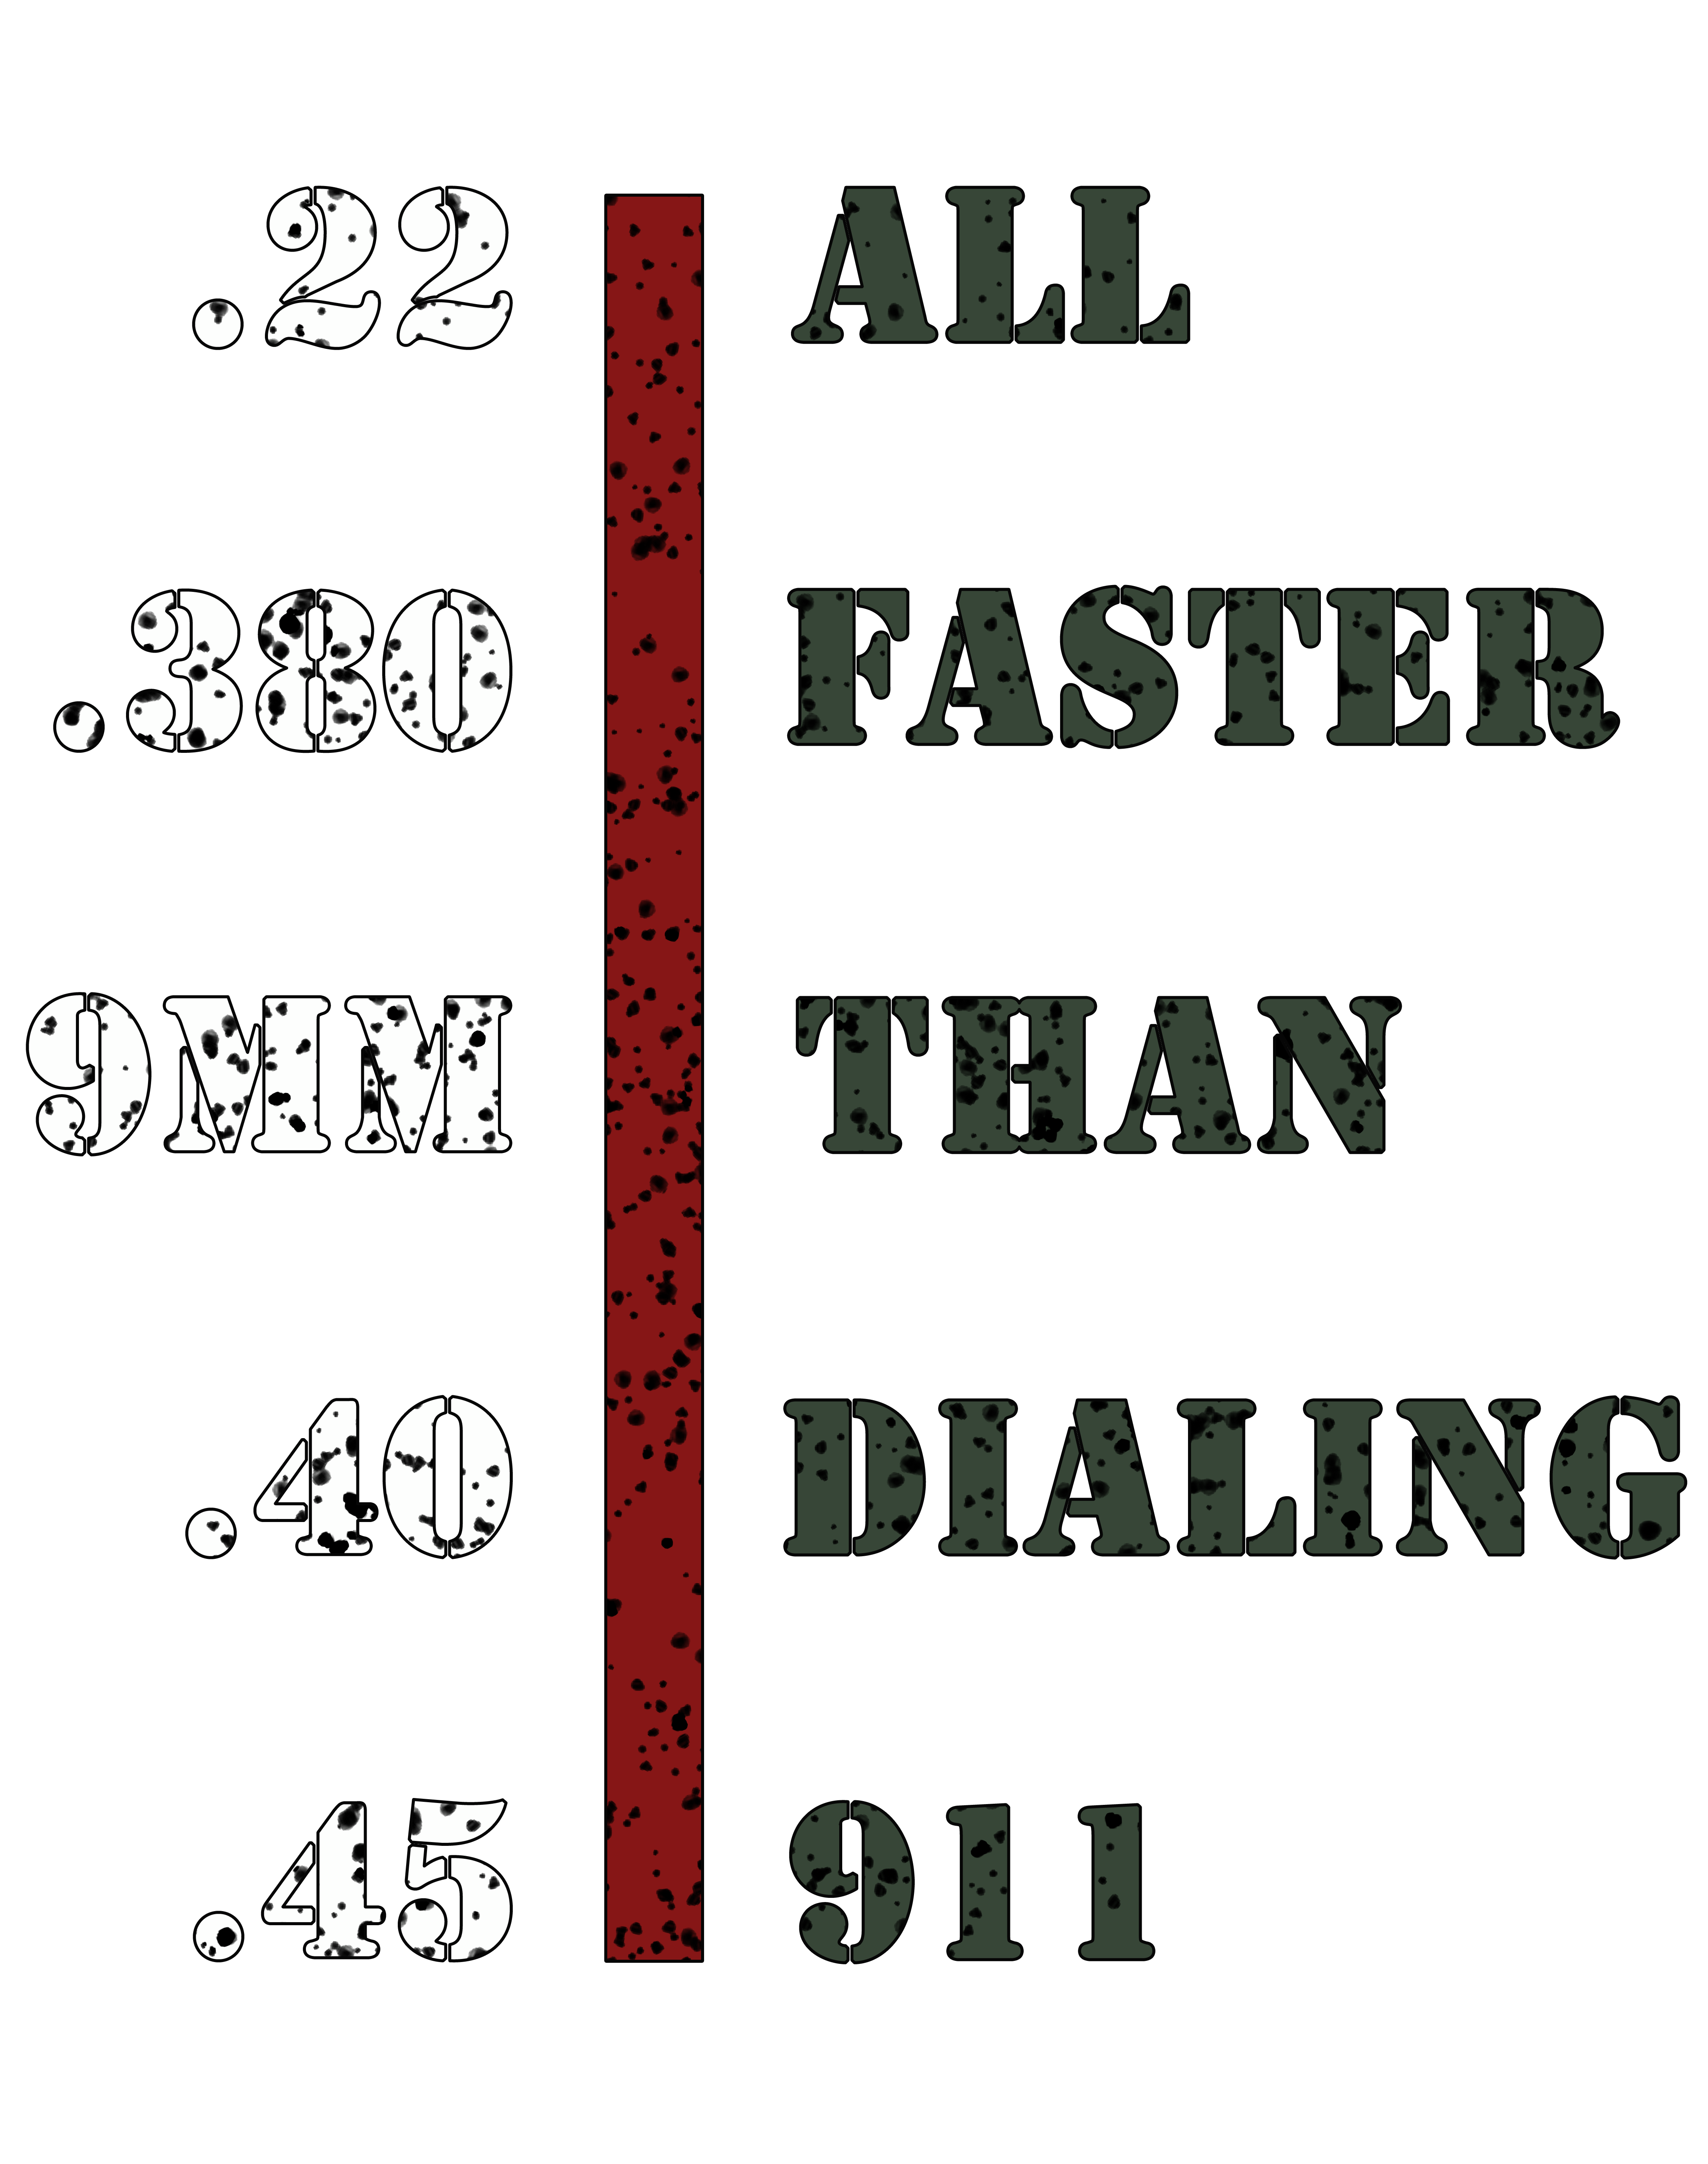 All Faster Than Dialing 911 T-shirt